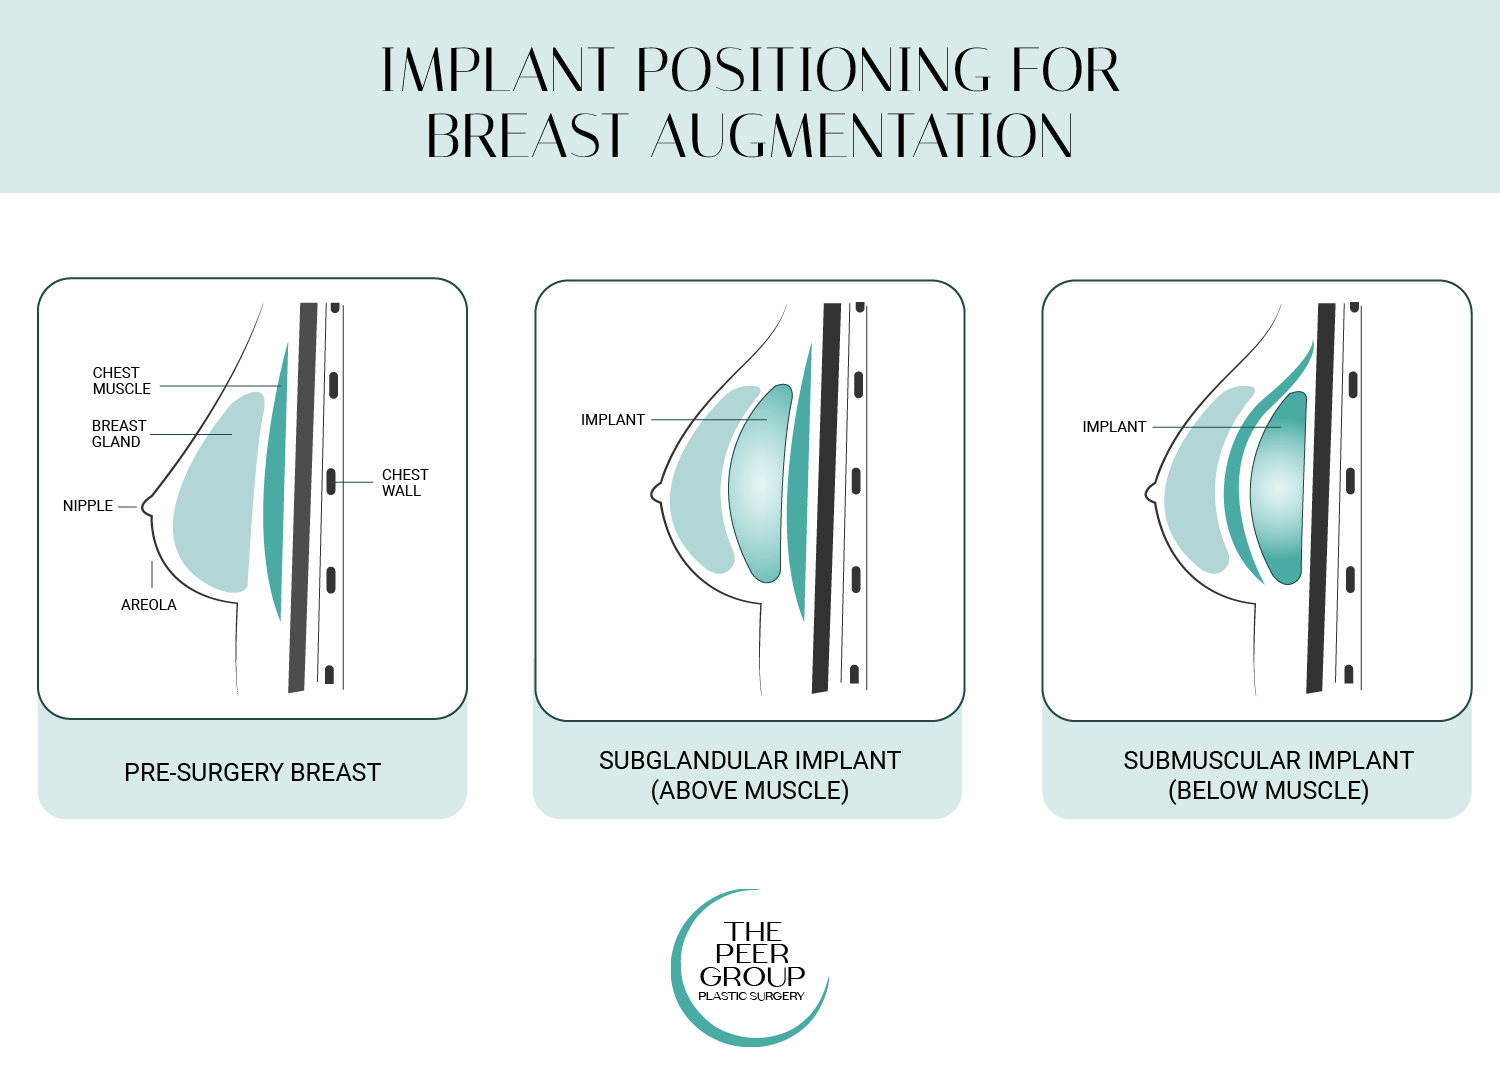 Compare subglandular and submuscular implant placement for breast augmentation at New Jersey’s The Peer Group.